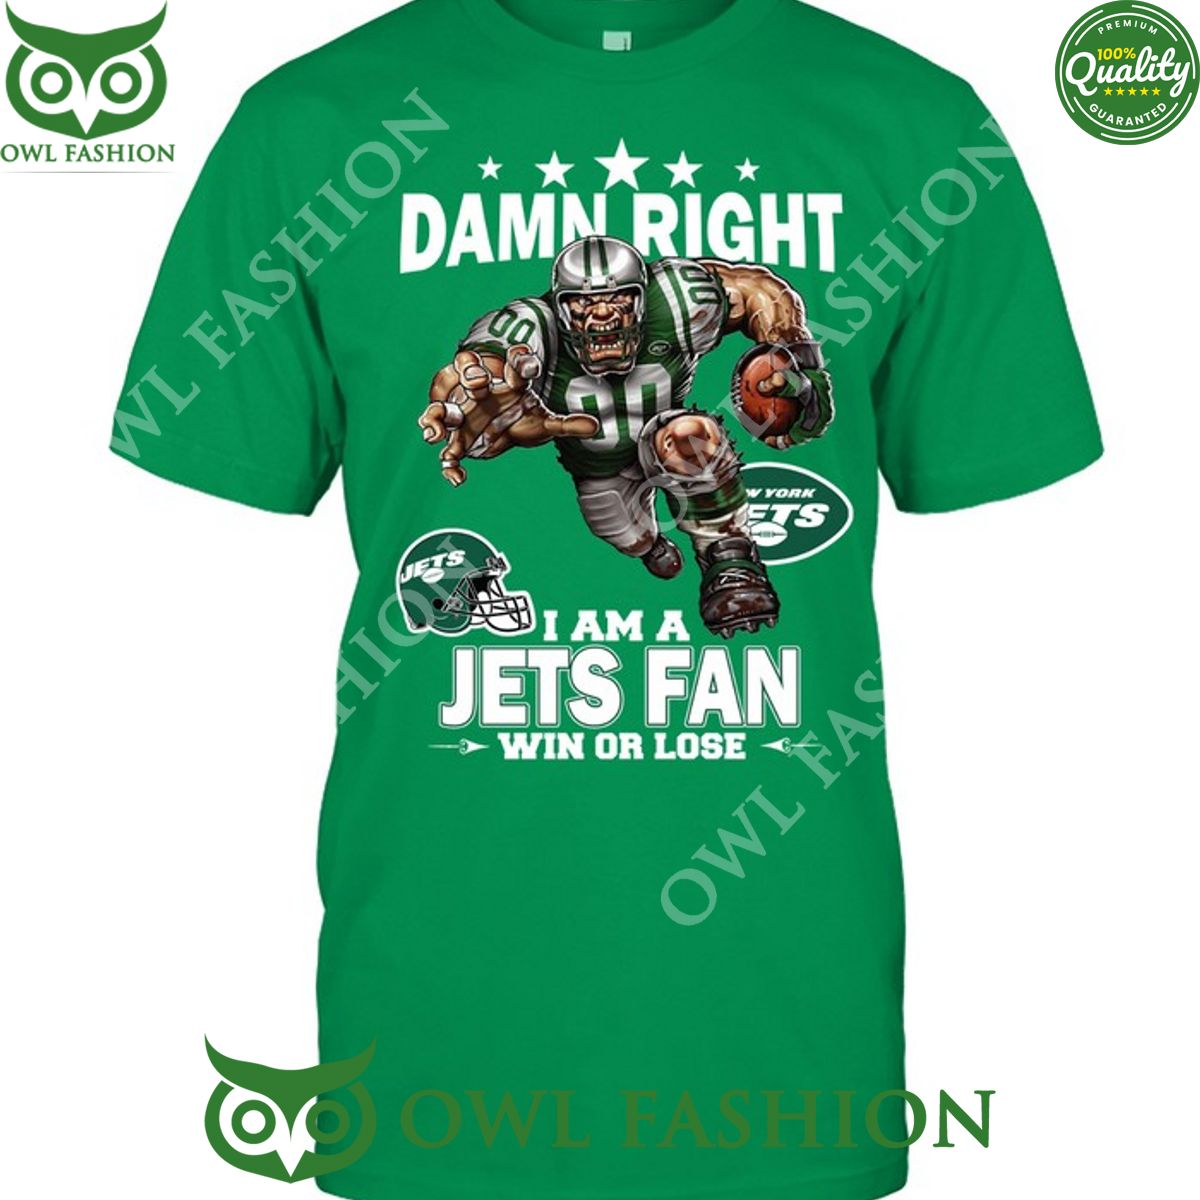 Damn Right New York Jets NFL Fan Win or lose t shirt